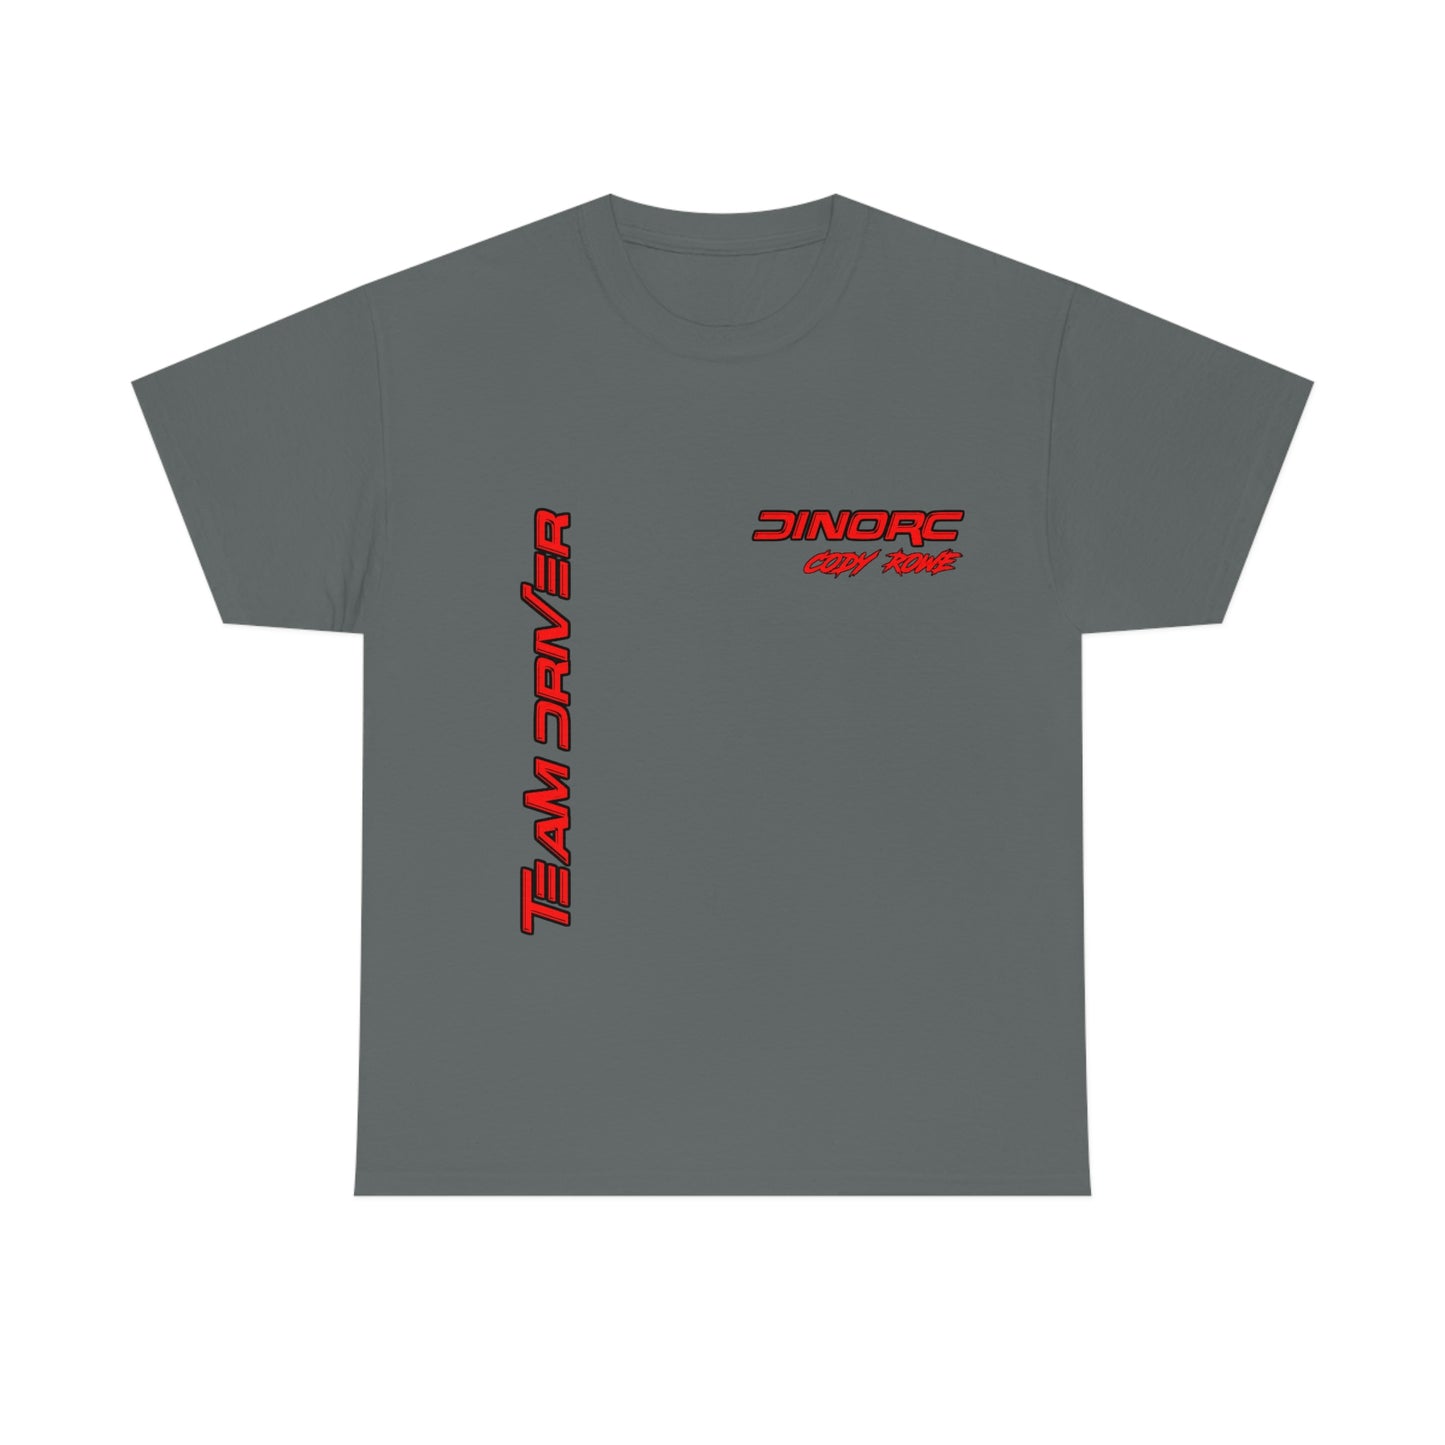 Team Driver Cody Rowe Front and Back DinoRc Logo T-Shirt S-5x 5 colors